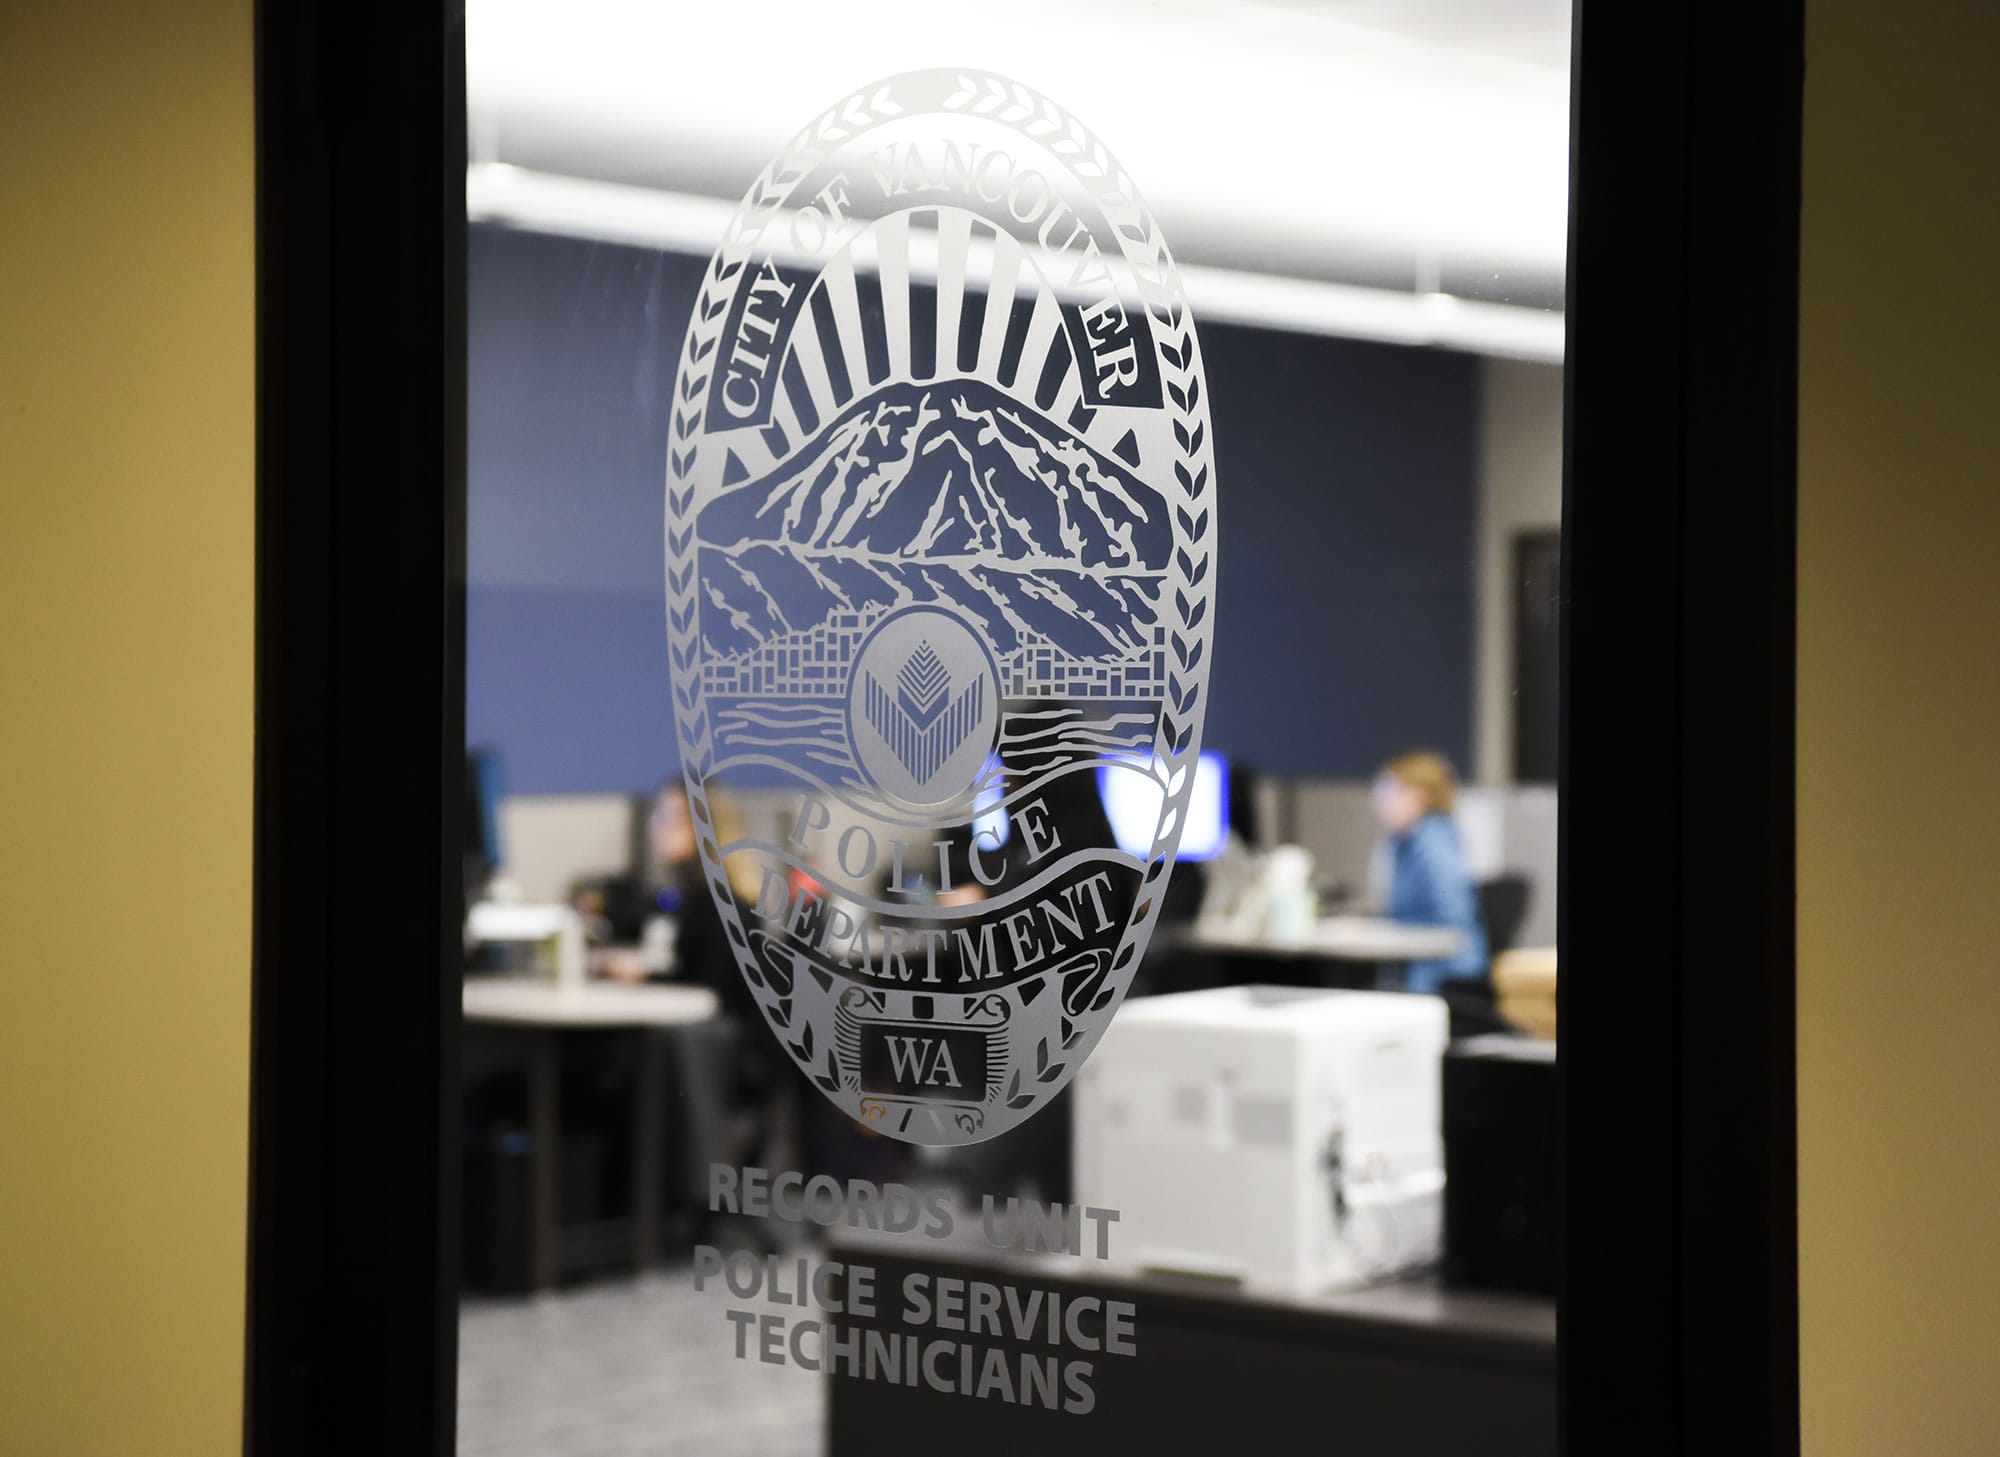 The Vancouver Police Department West Precinct added a records office and records window for the public, which helps support law enforcement process police reports, as seen last December. (Ariane Kunze/The Columbian) The Department is in the market for a new software program.